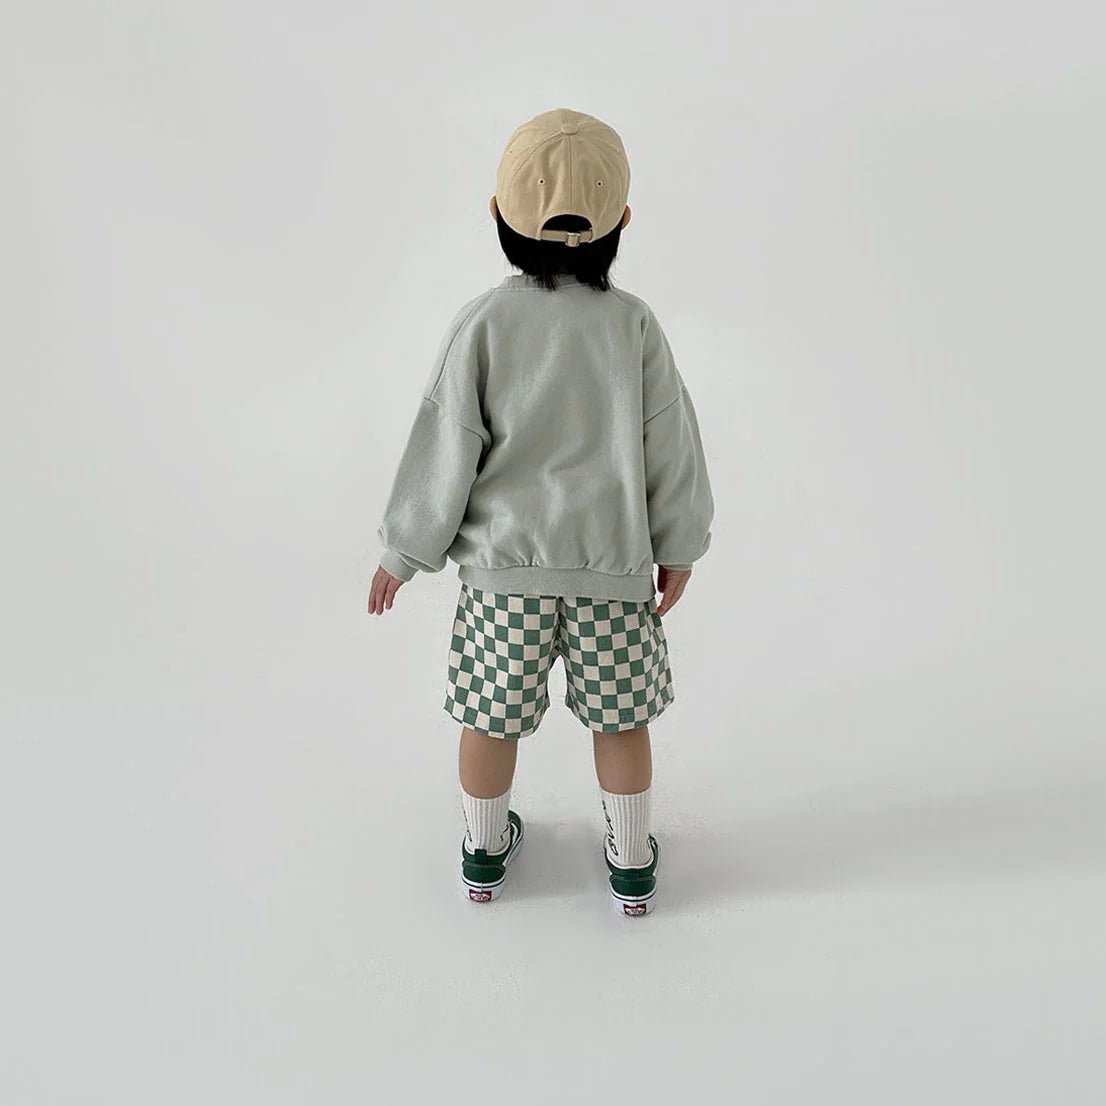 Checker Board Shorts find Stylish Fashion for Little People- at Little Foxx Concept Store